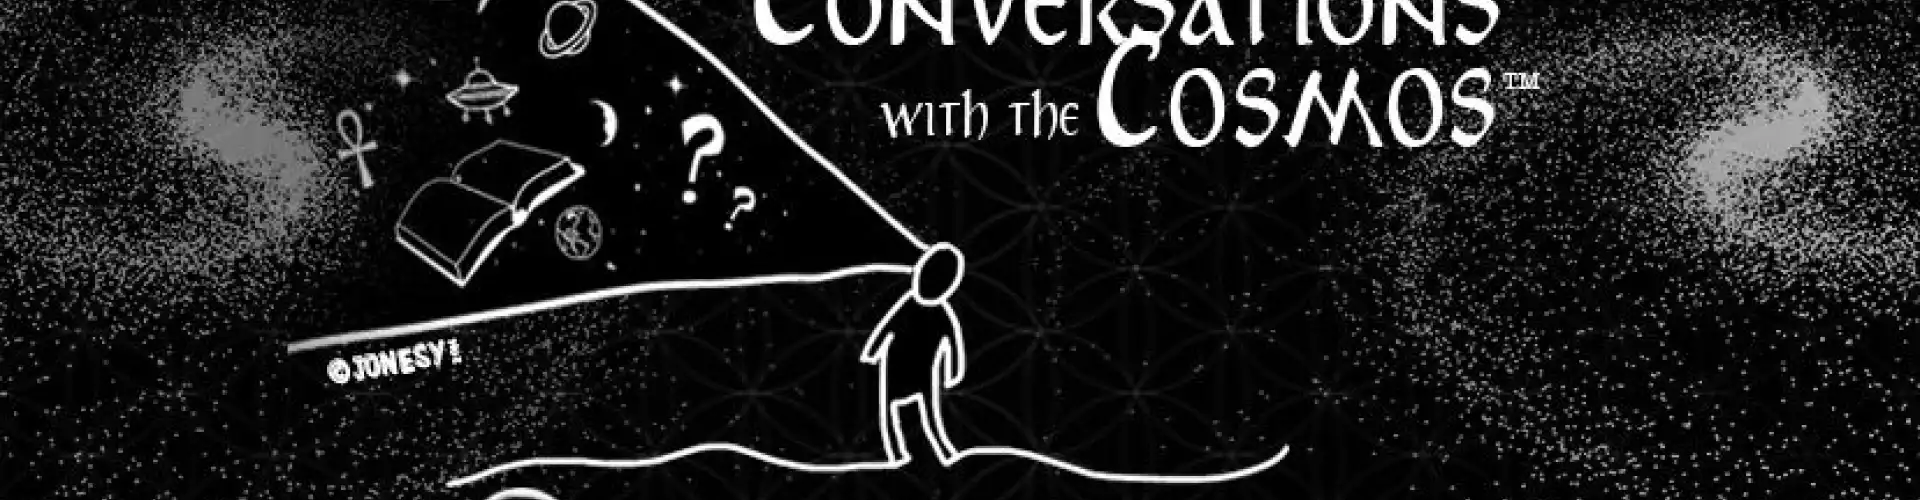 Public Channeling with Darshana Patel - Conversations with the Cosmos